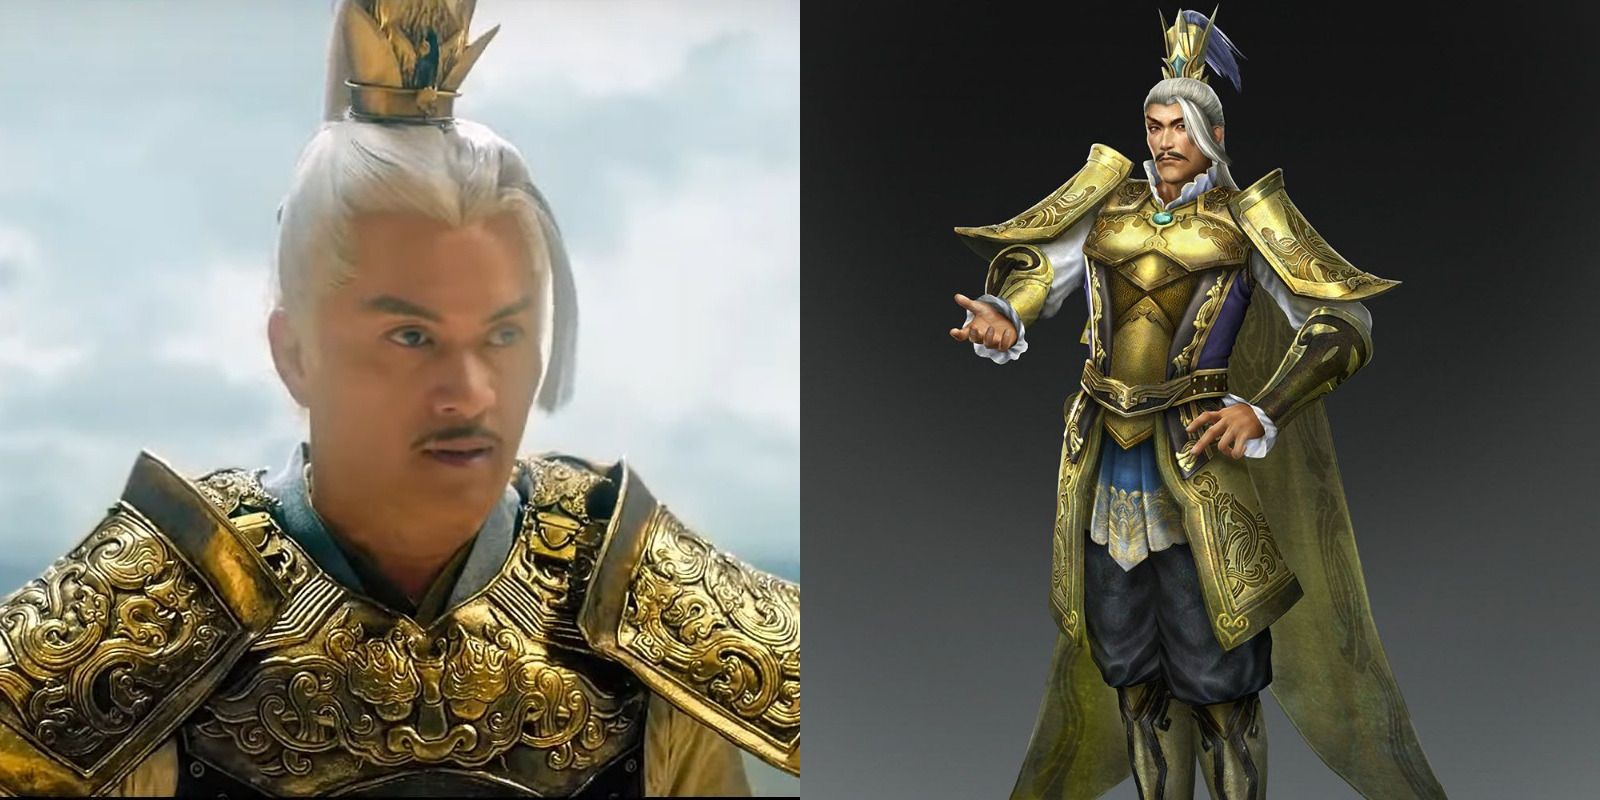 Live Action Yuan Shao and Videogame Yuan Shao